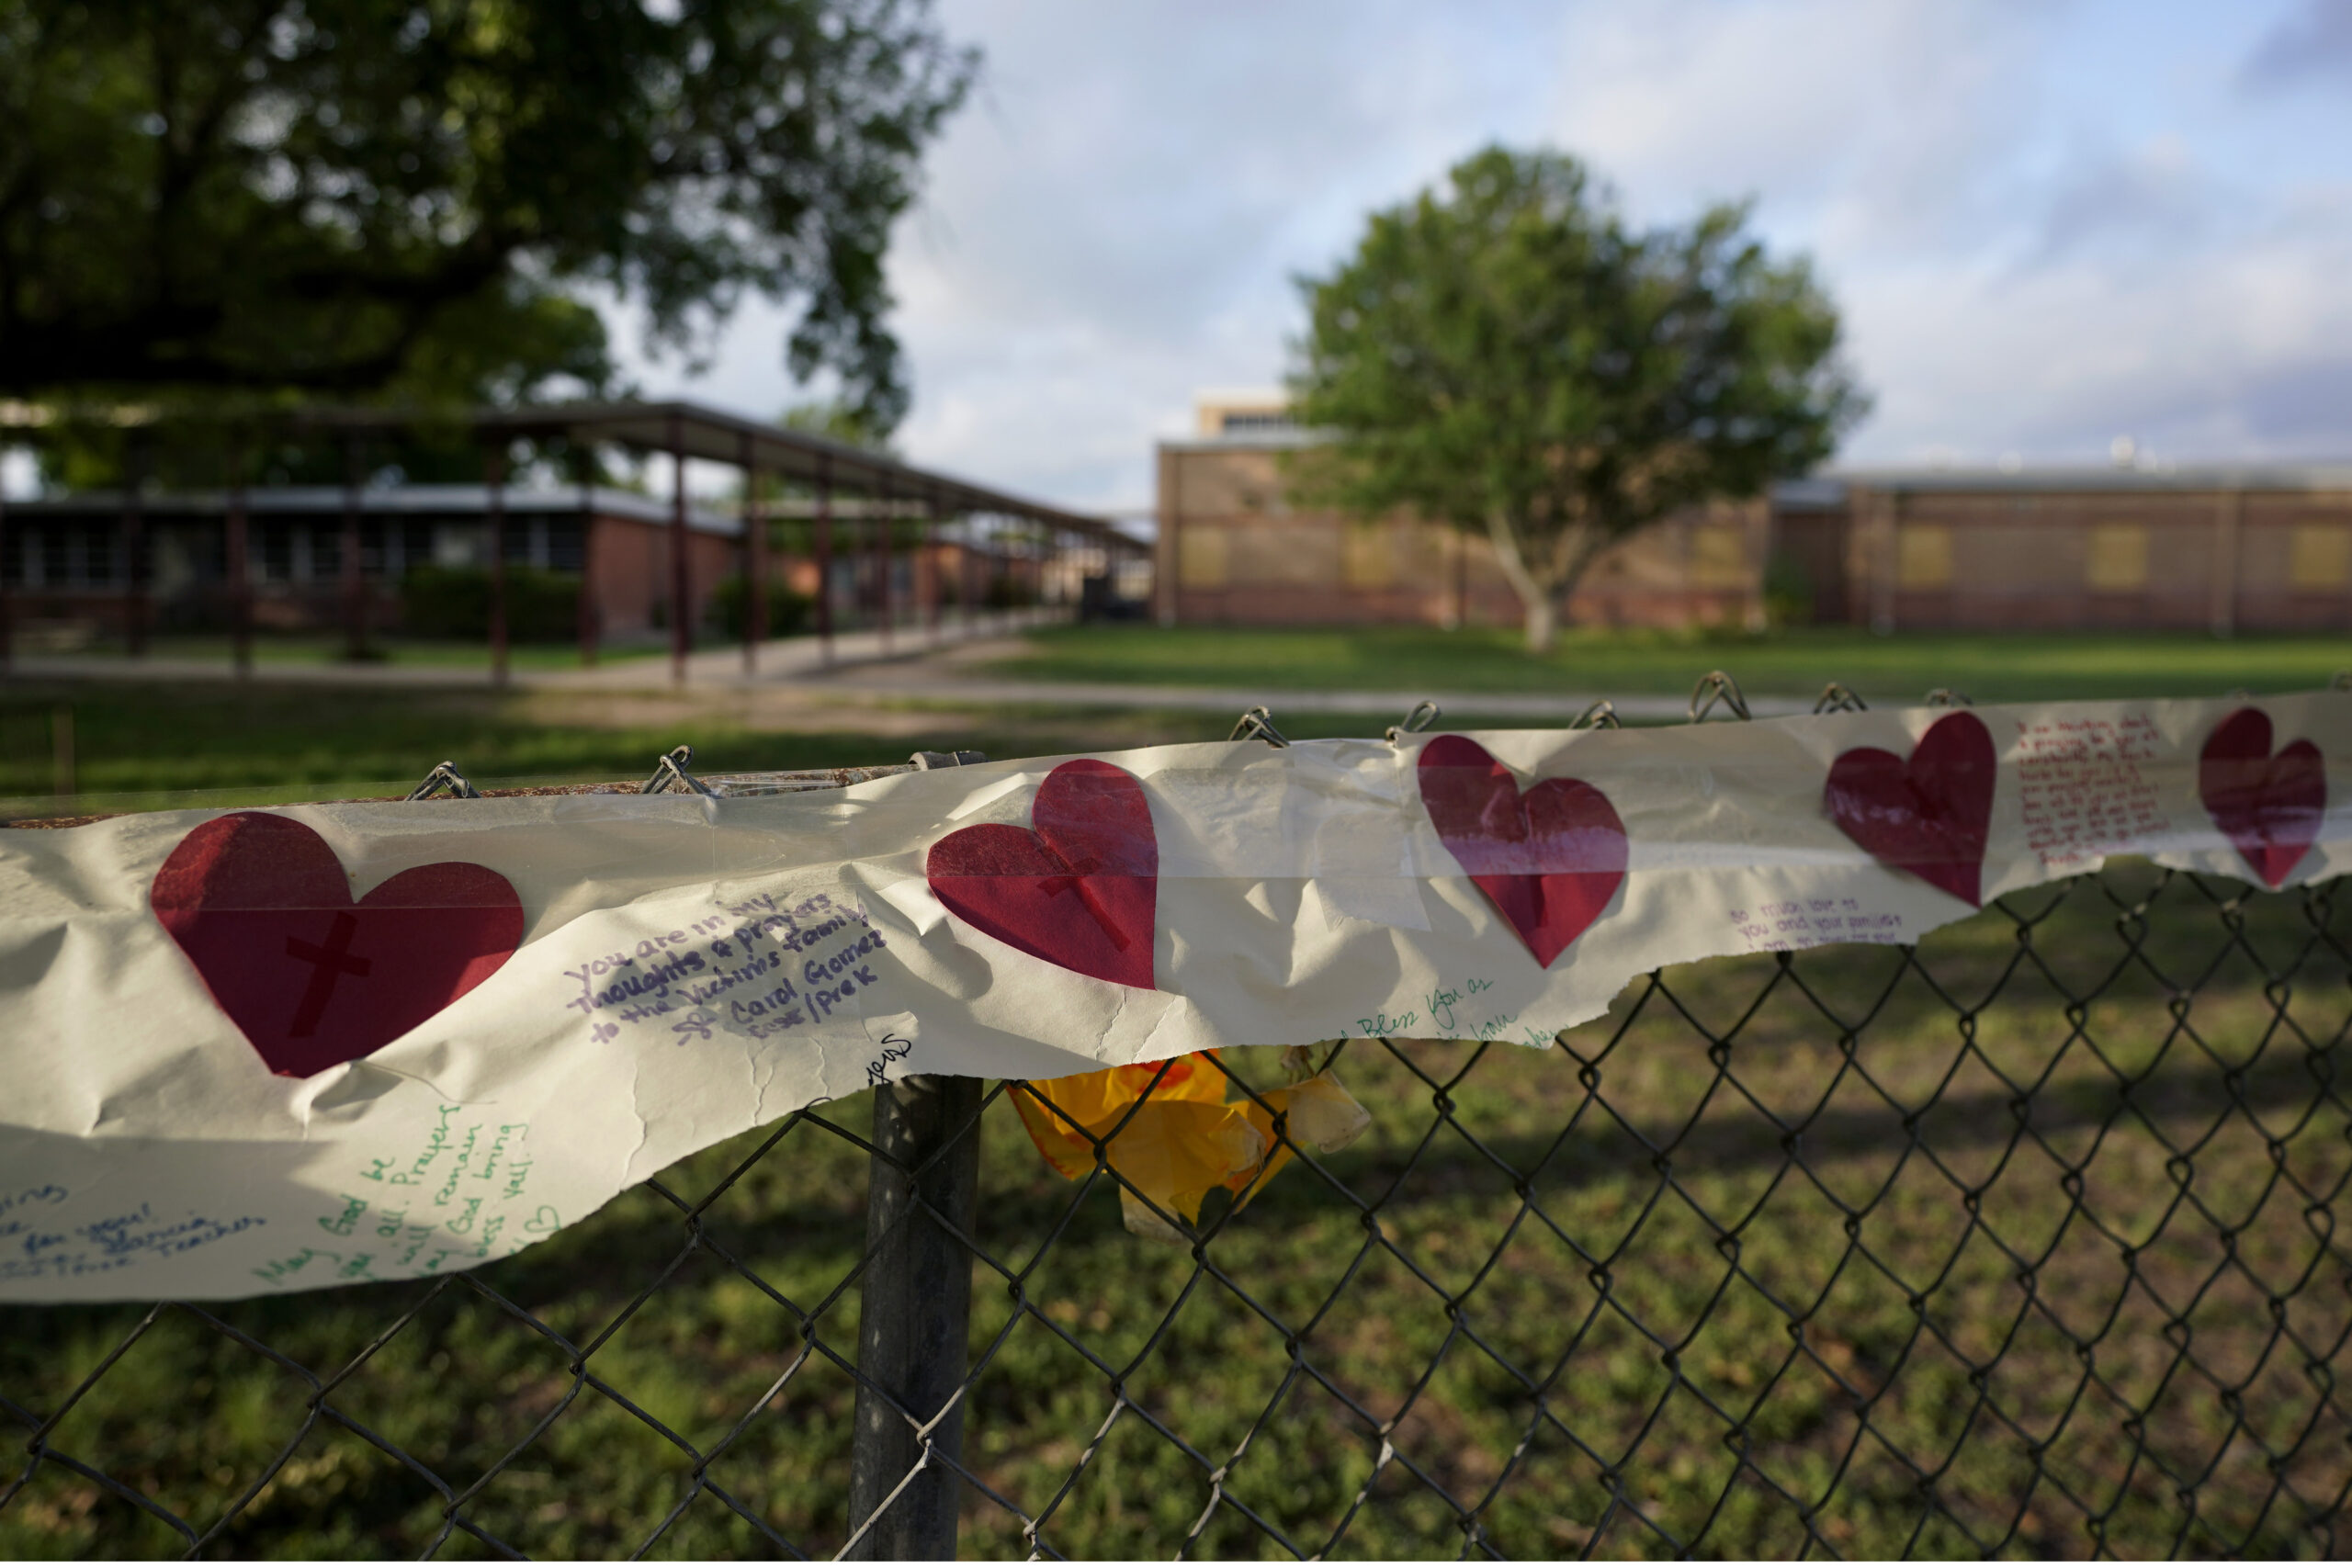 Hearts on a banner hang on a fence at a boarded up Robb Elementary School building where a memorial has been created to honor the victims killed in the recent school shooting